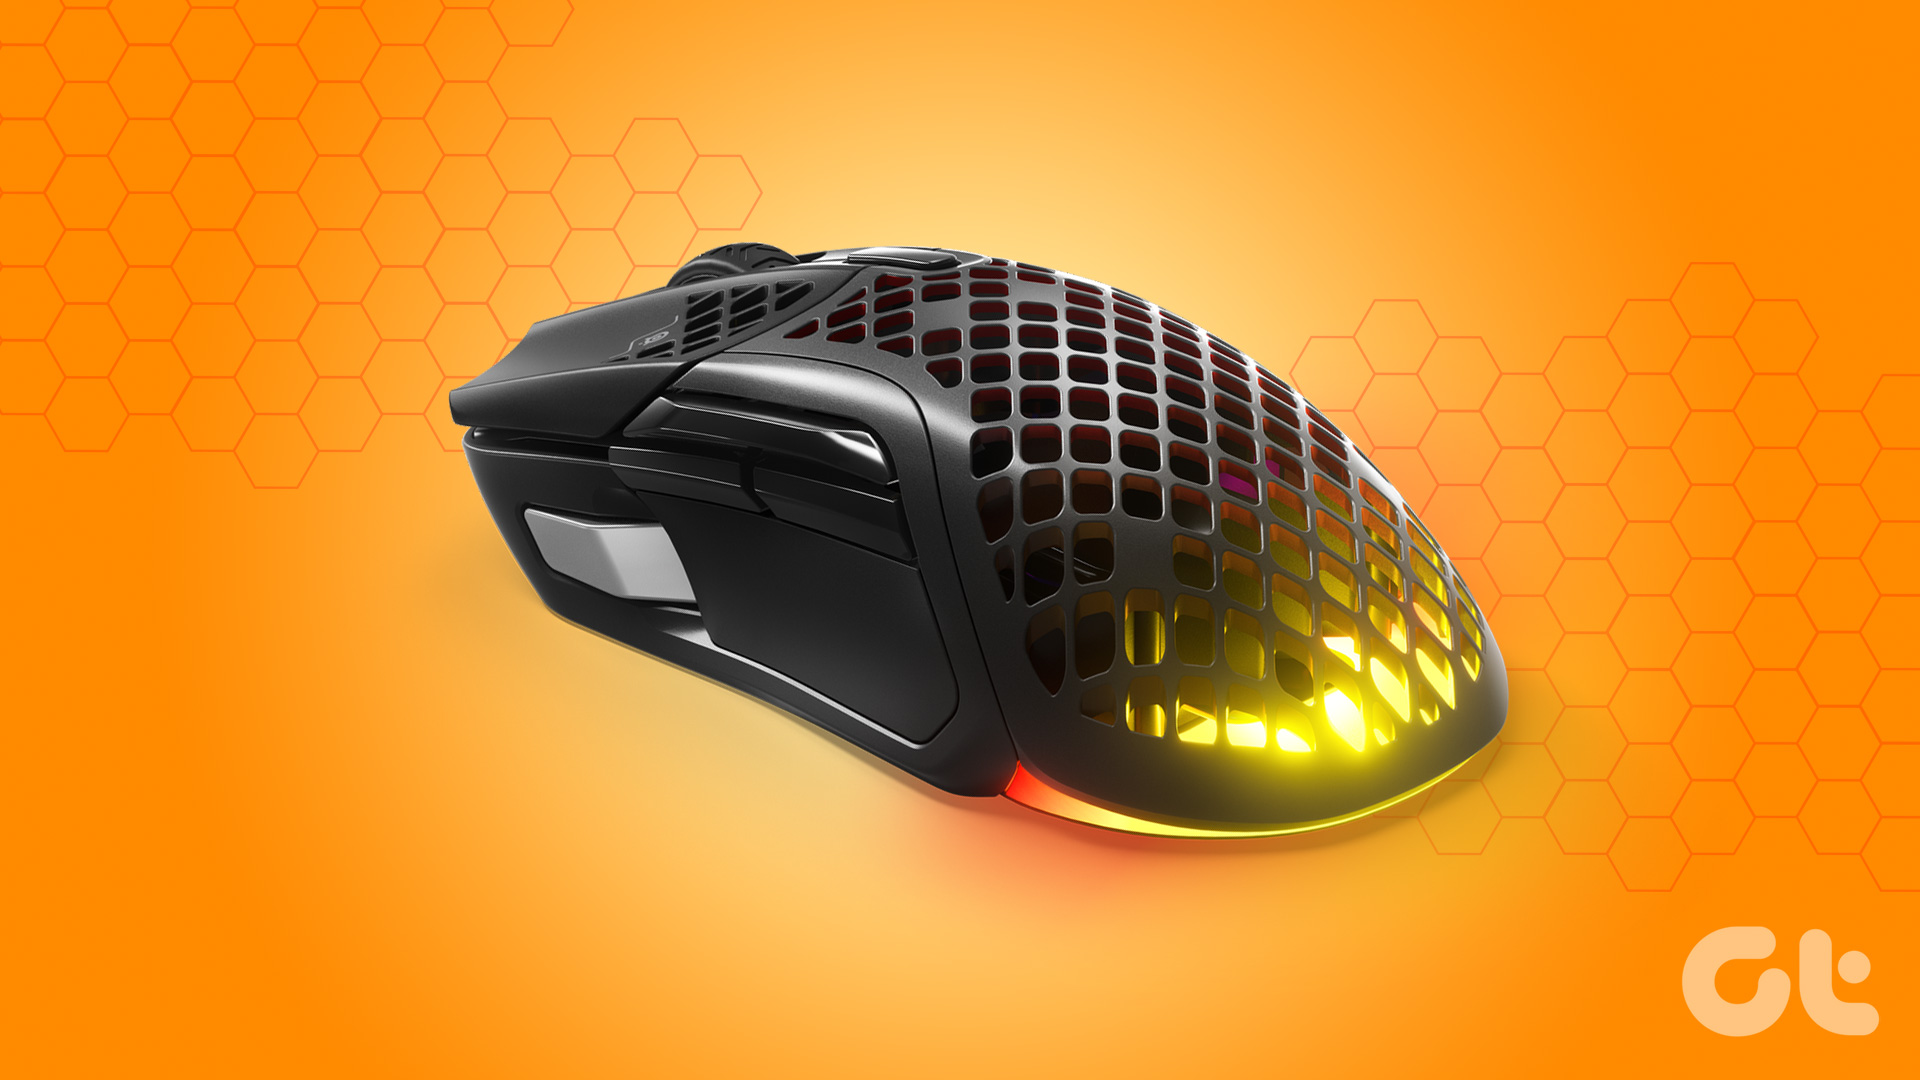 Best Lightweight Gaming Mouse You Can Buy 2023 - Guiding Tech